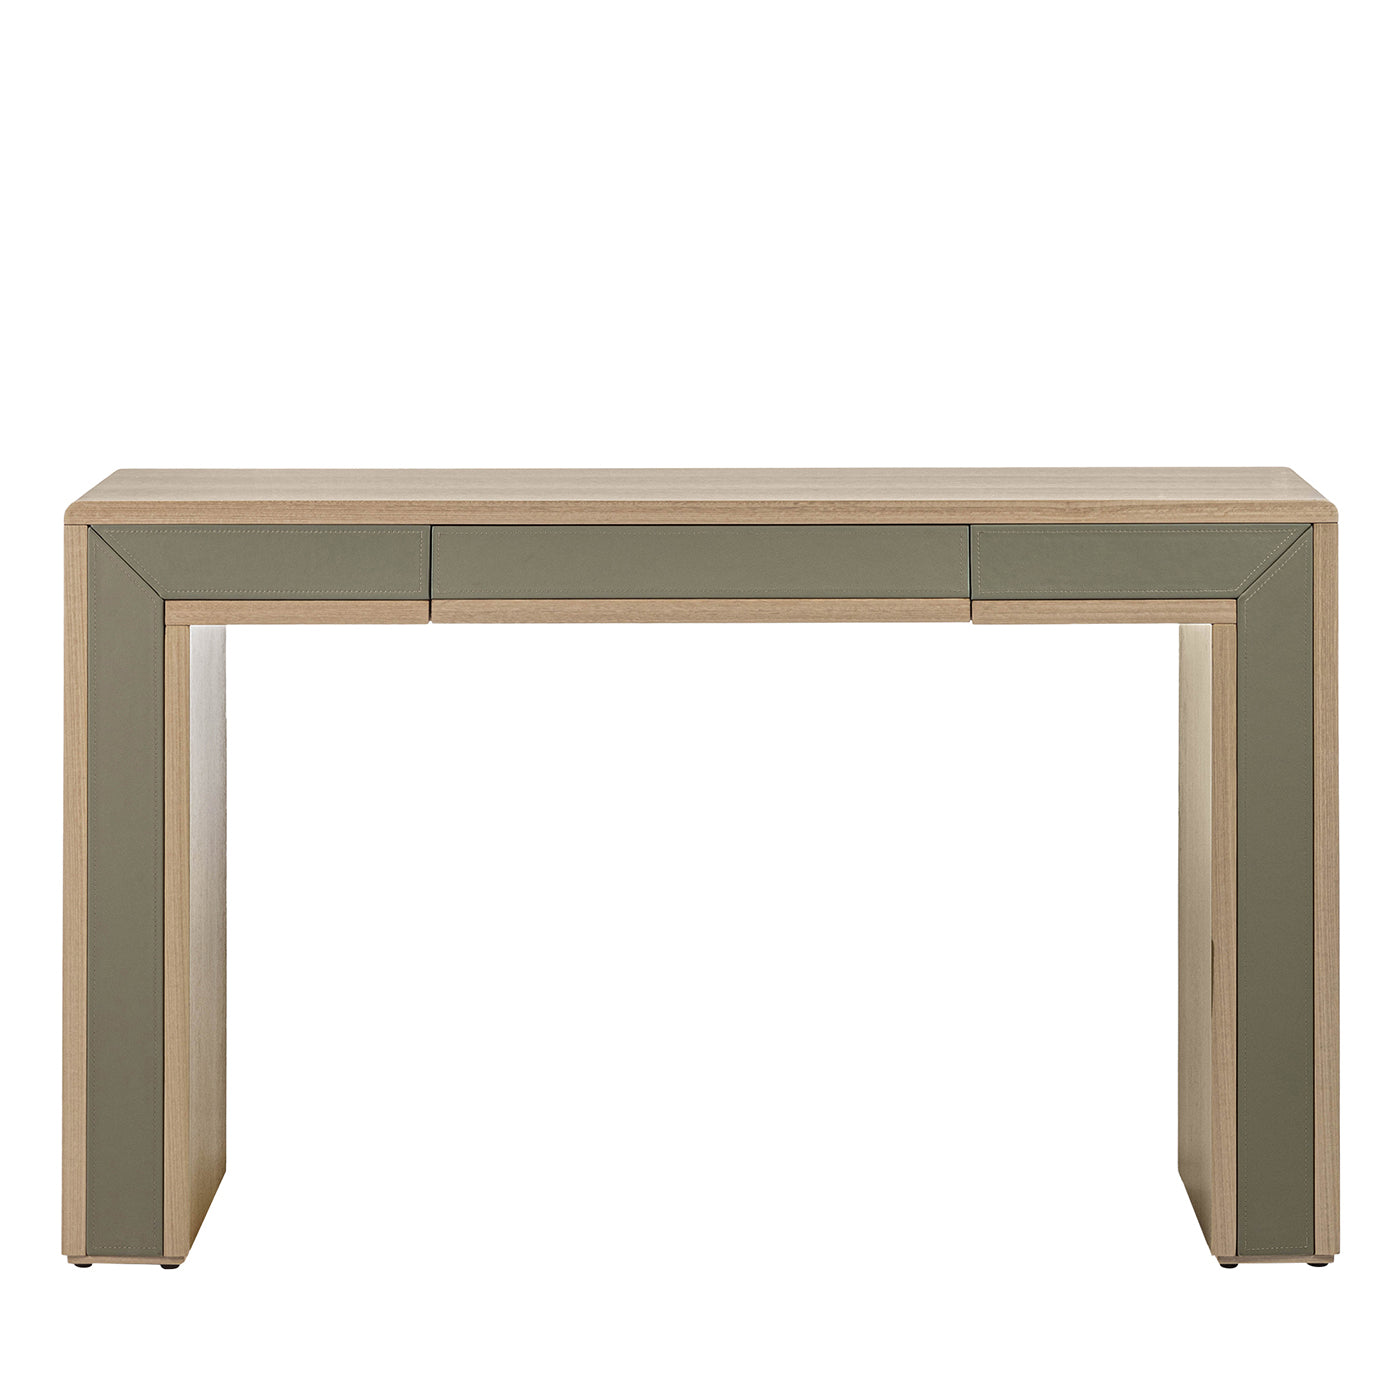 Galileo Lux Leather & Eucalyptus Console - Main view